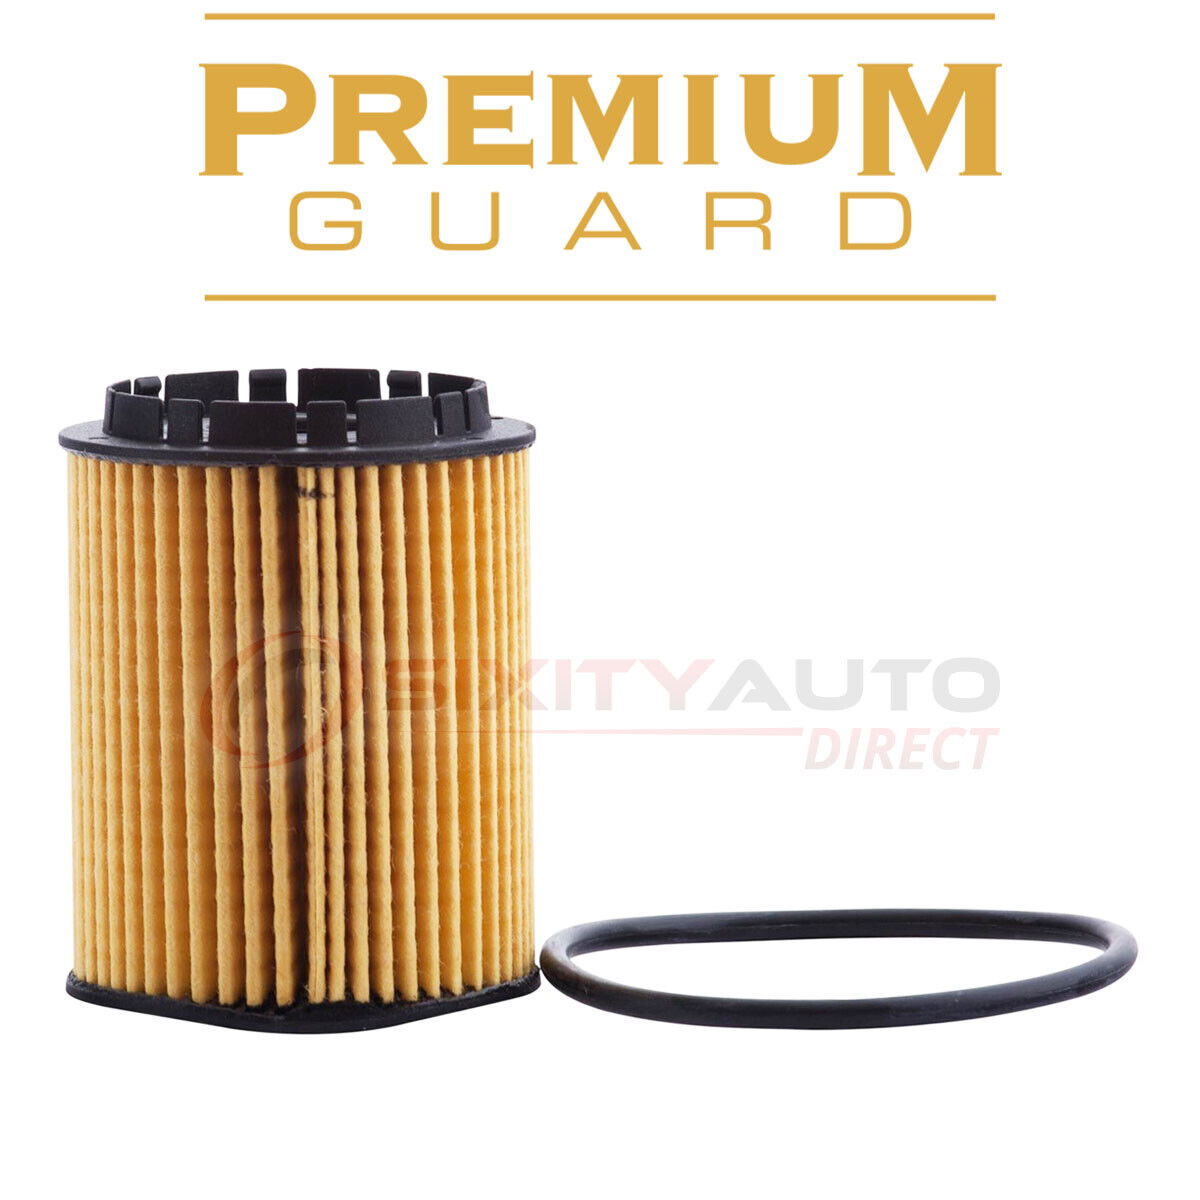 Pronto PO6162 Engine Oil Filter for X6162 VO116 VC9713 S9713 PPG6162 PO-186 dr